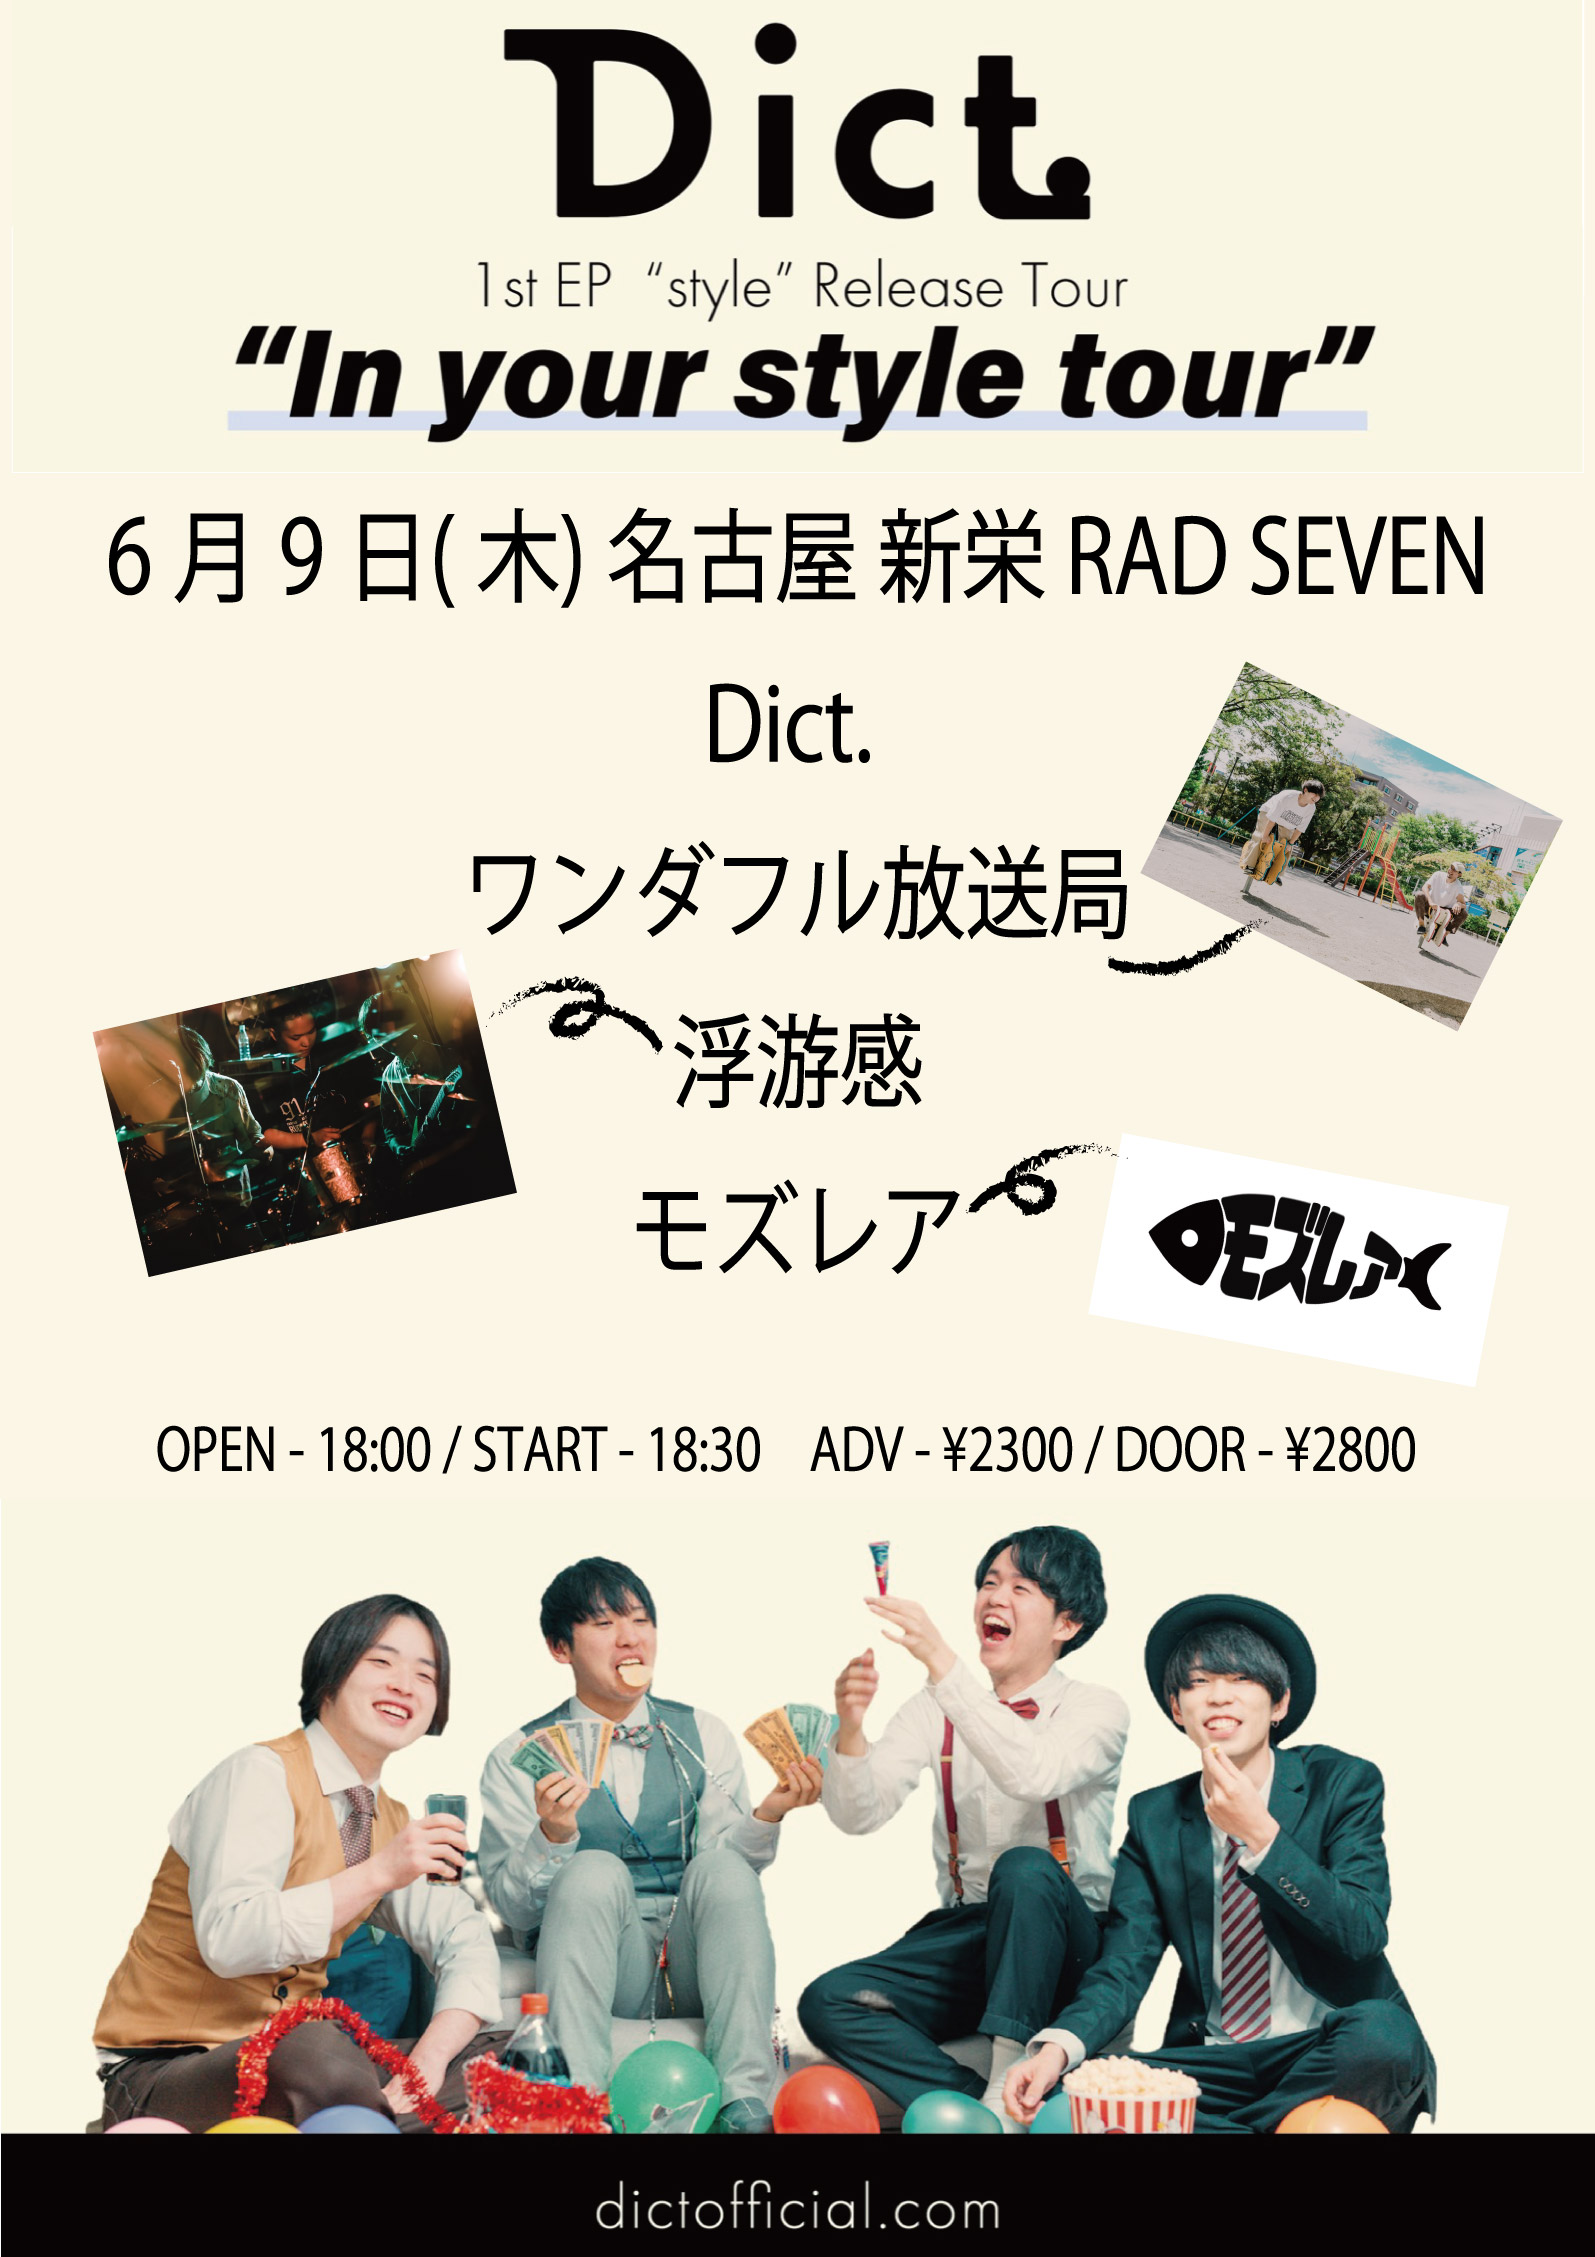 Dict. １st EP "style" Release Tour "In your style tour"